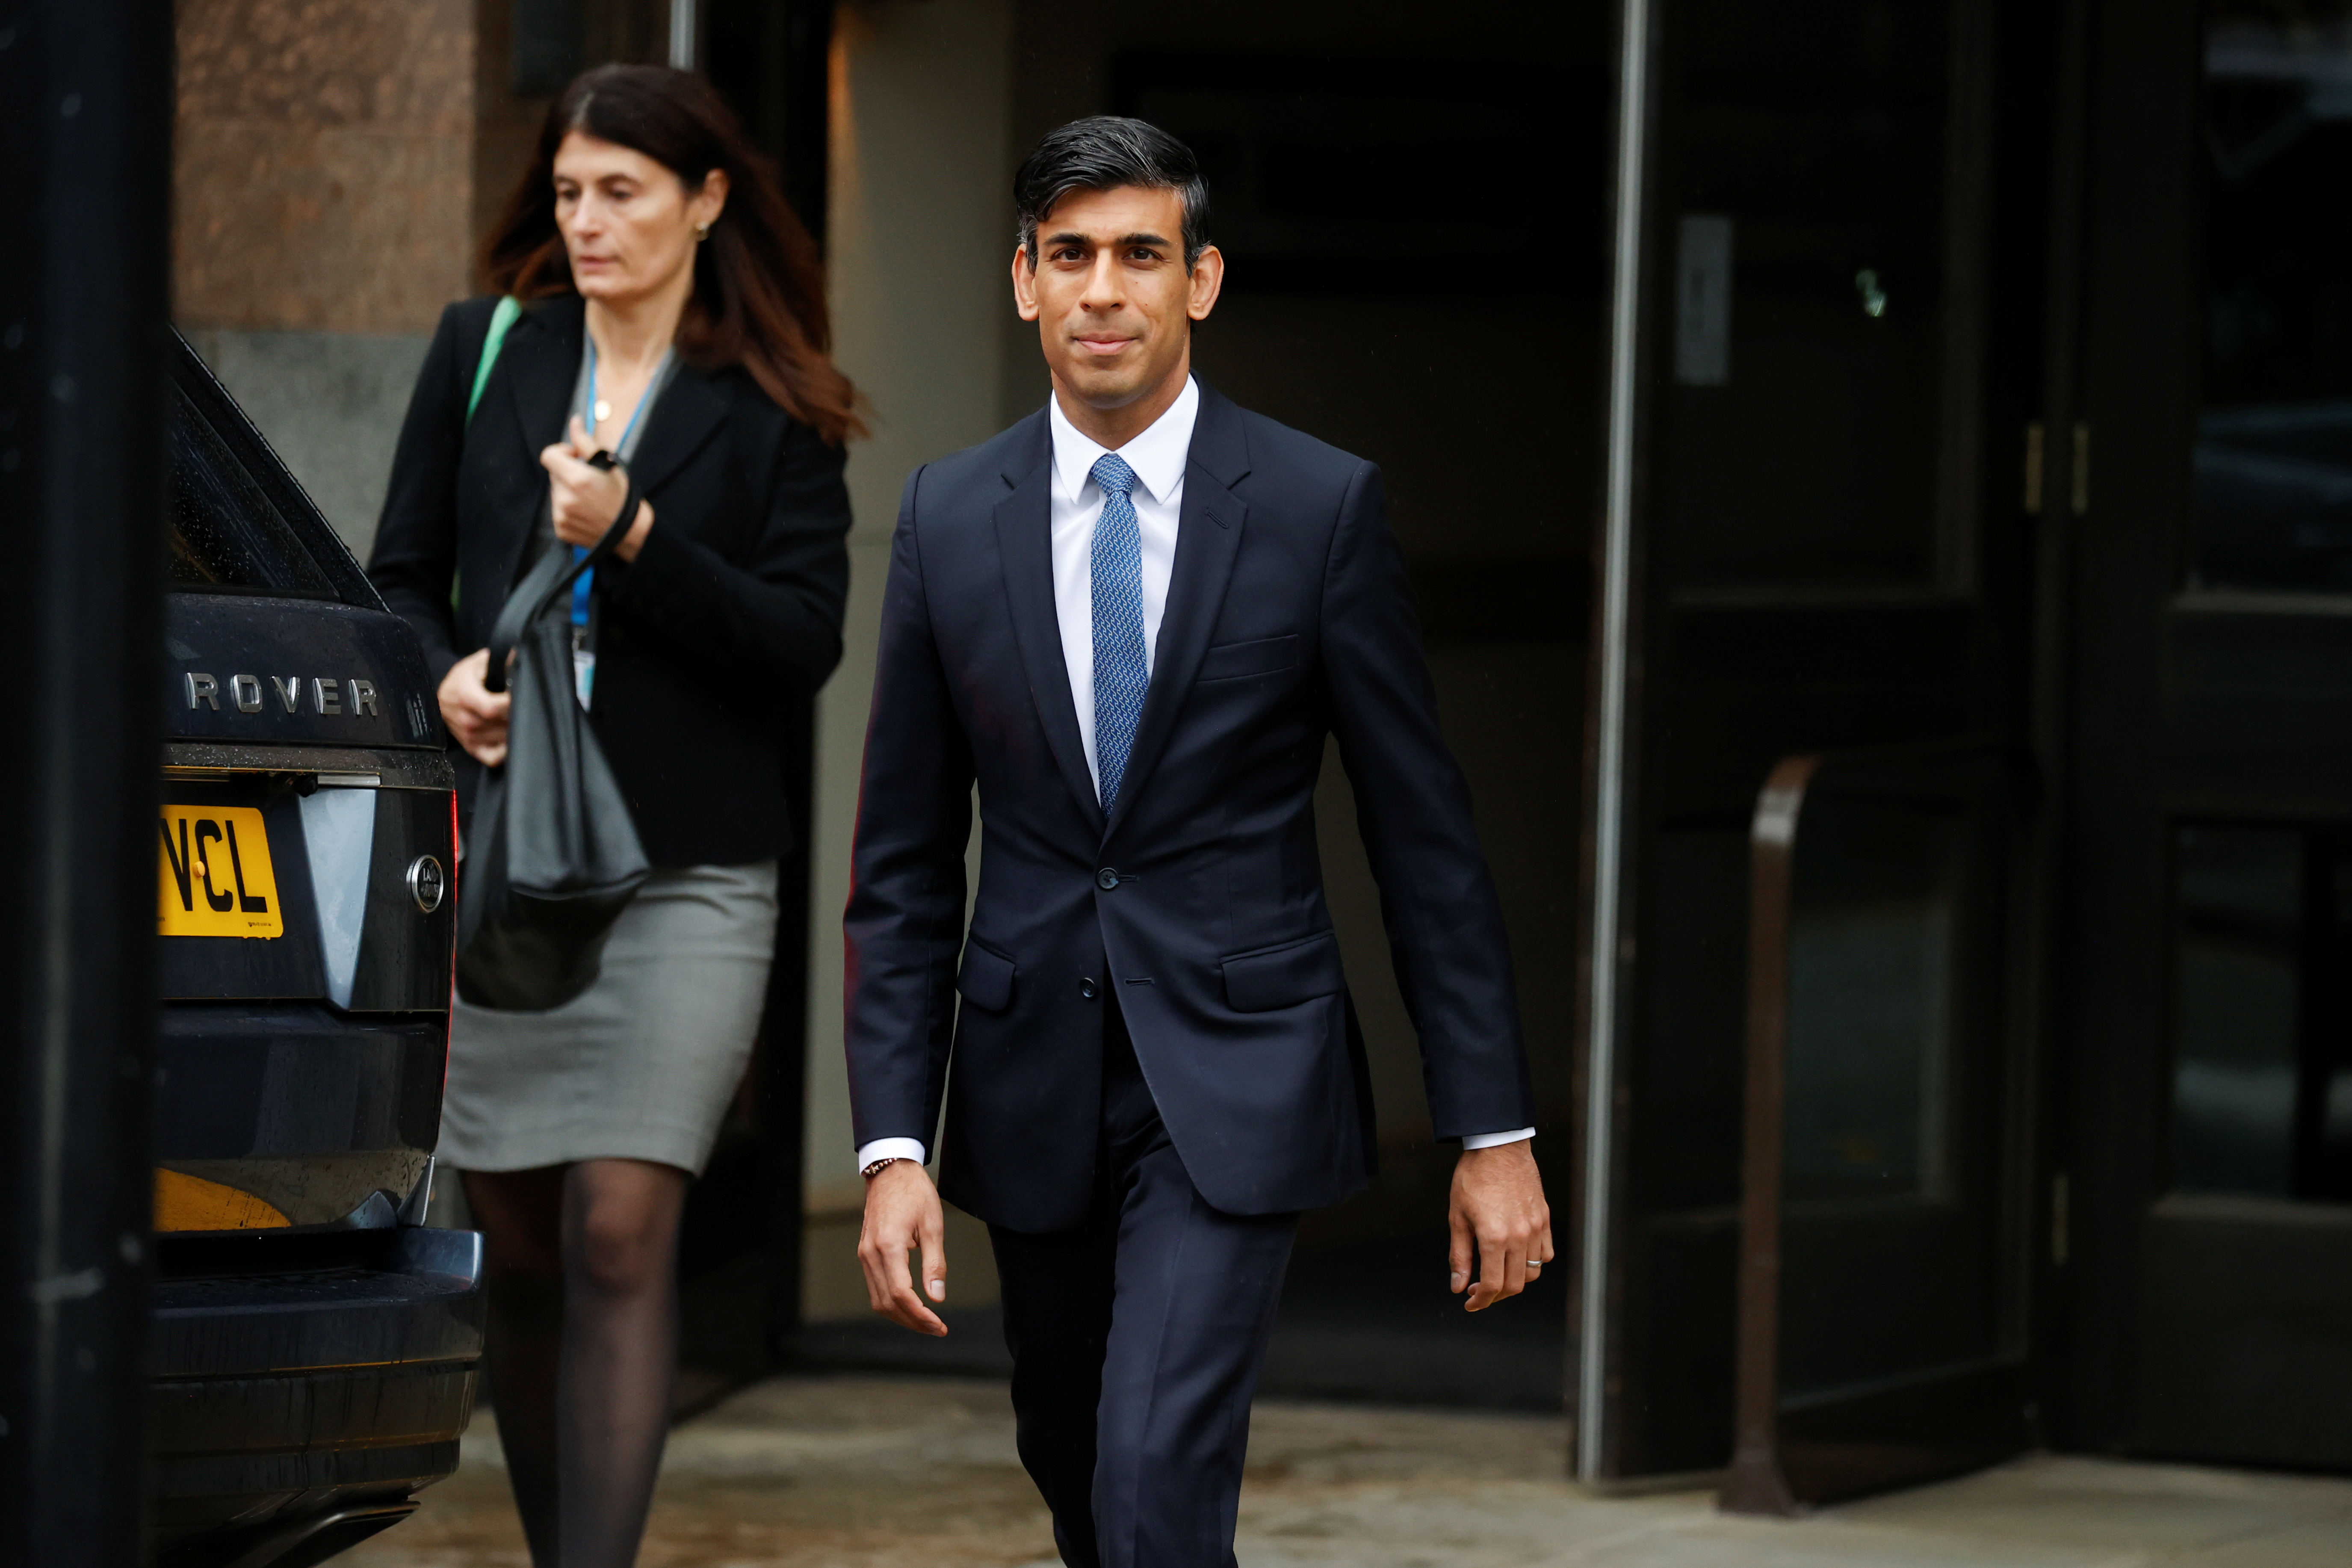 Britain's Chancellor of the Exchequer Rishi Sunak leaves a hotel to take part in the annual Conservative Party conference, in Manchester, Britain, October 5, 2021. REUTERS/Phil Noble